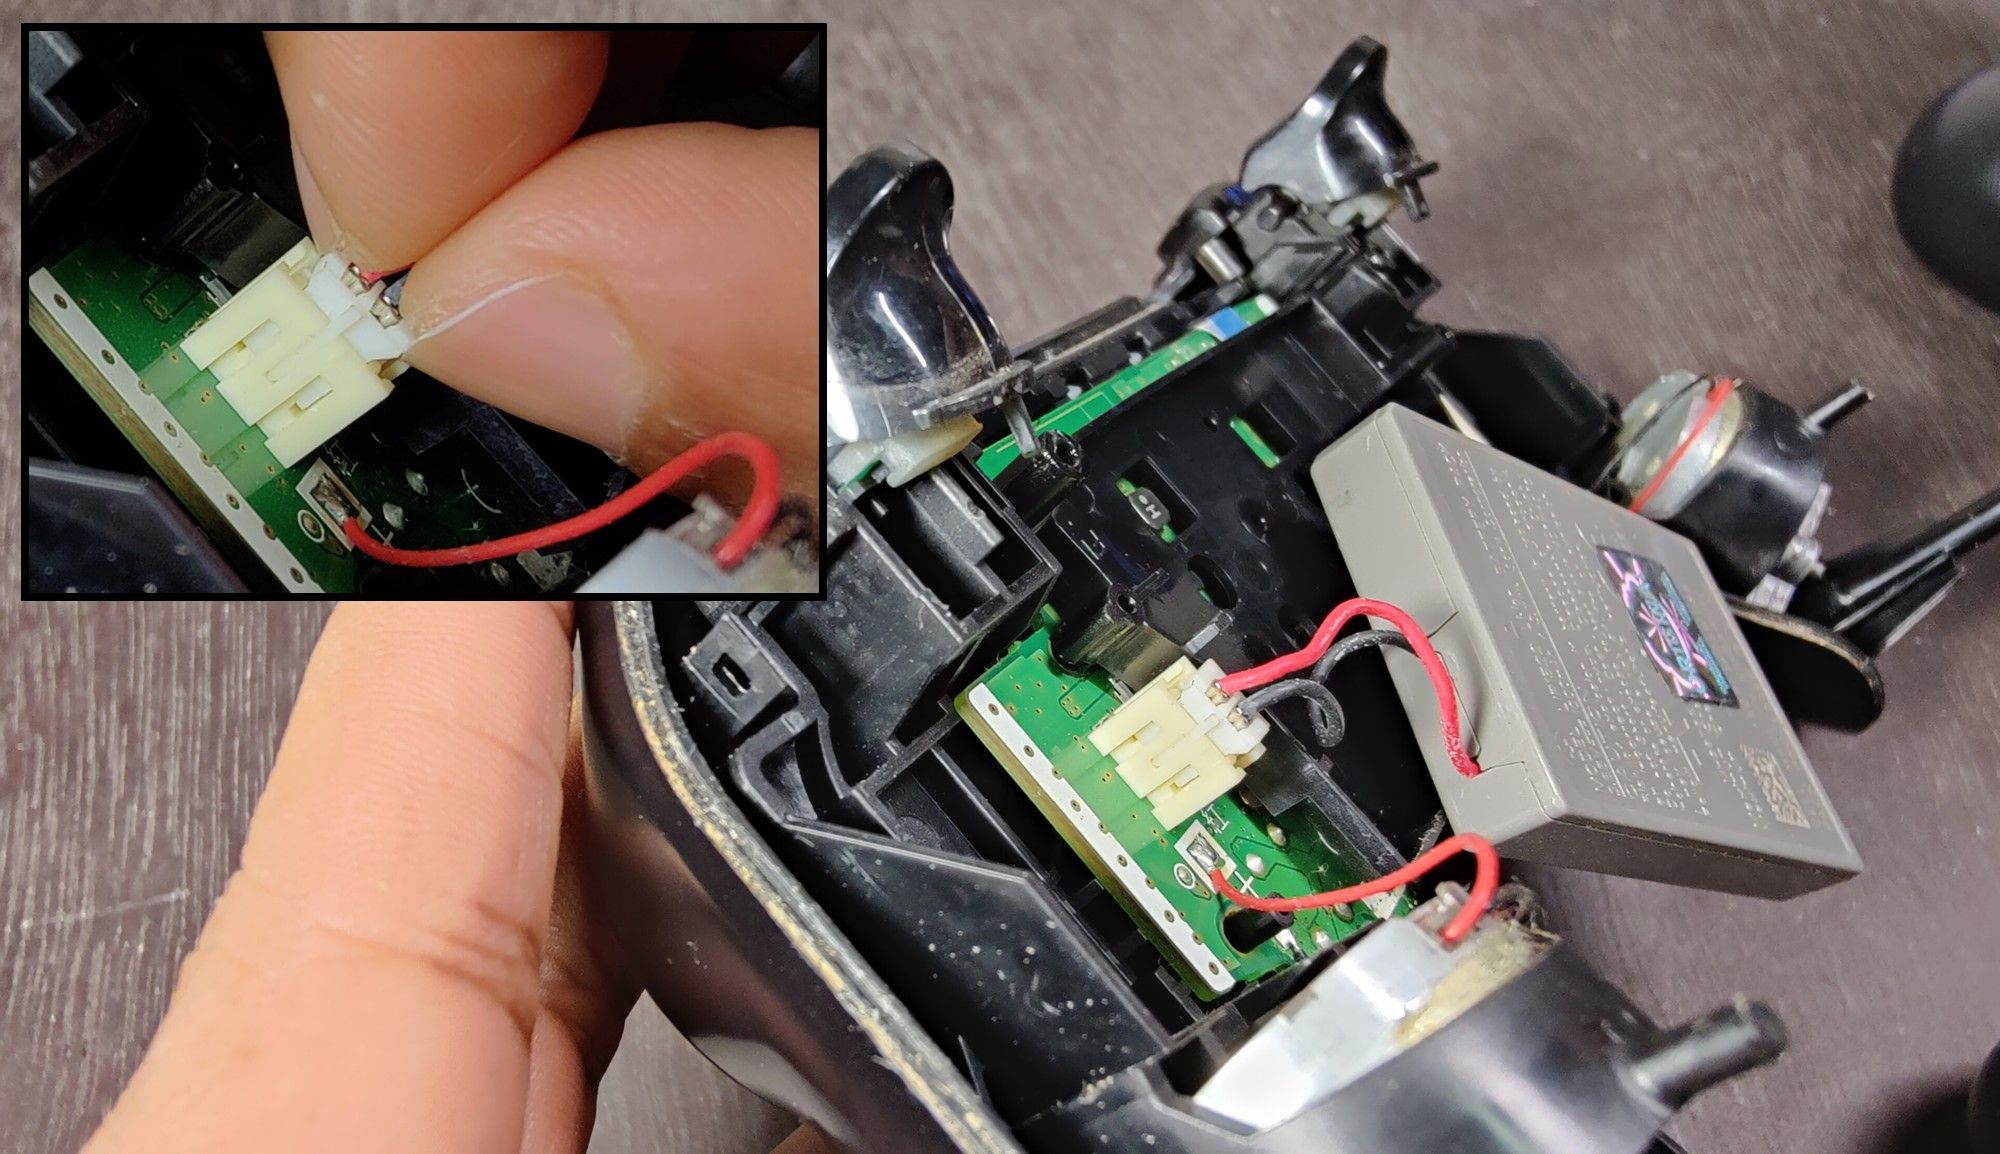 Removing the battery terminal of the PS4 controller.